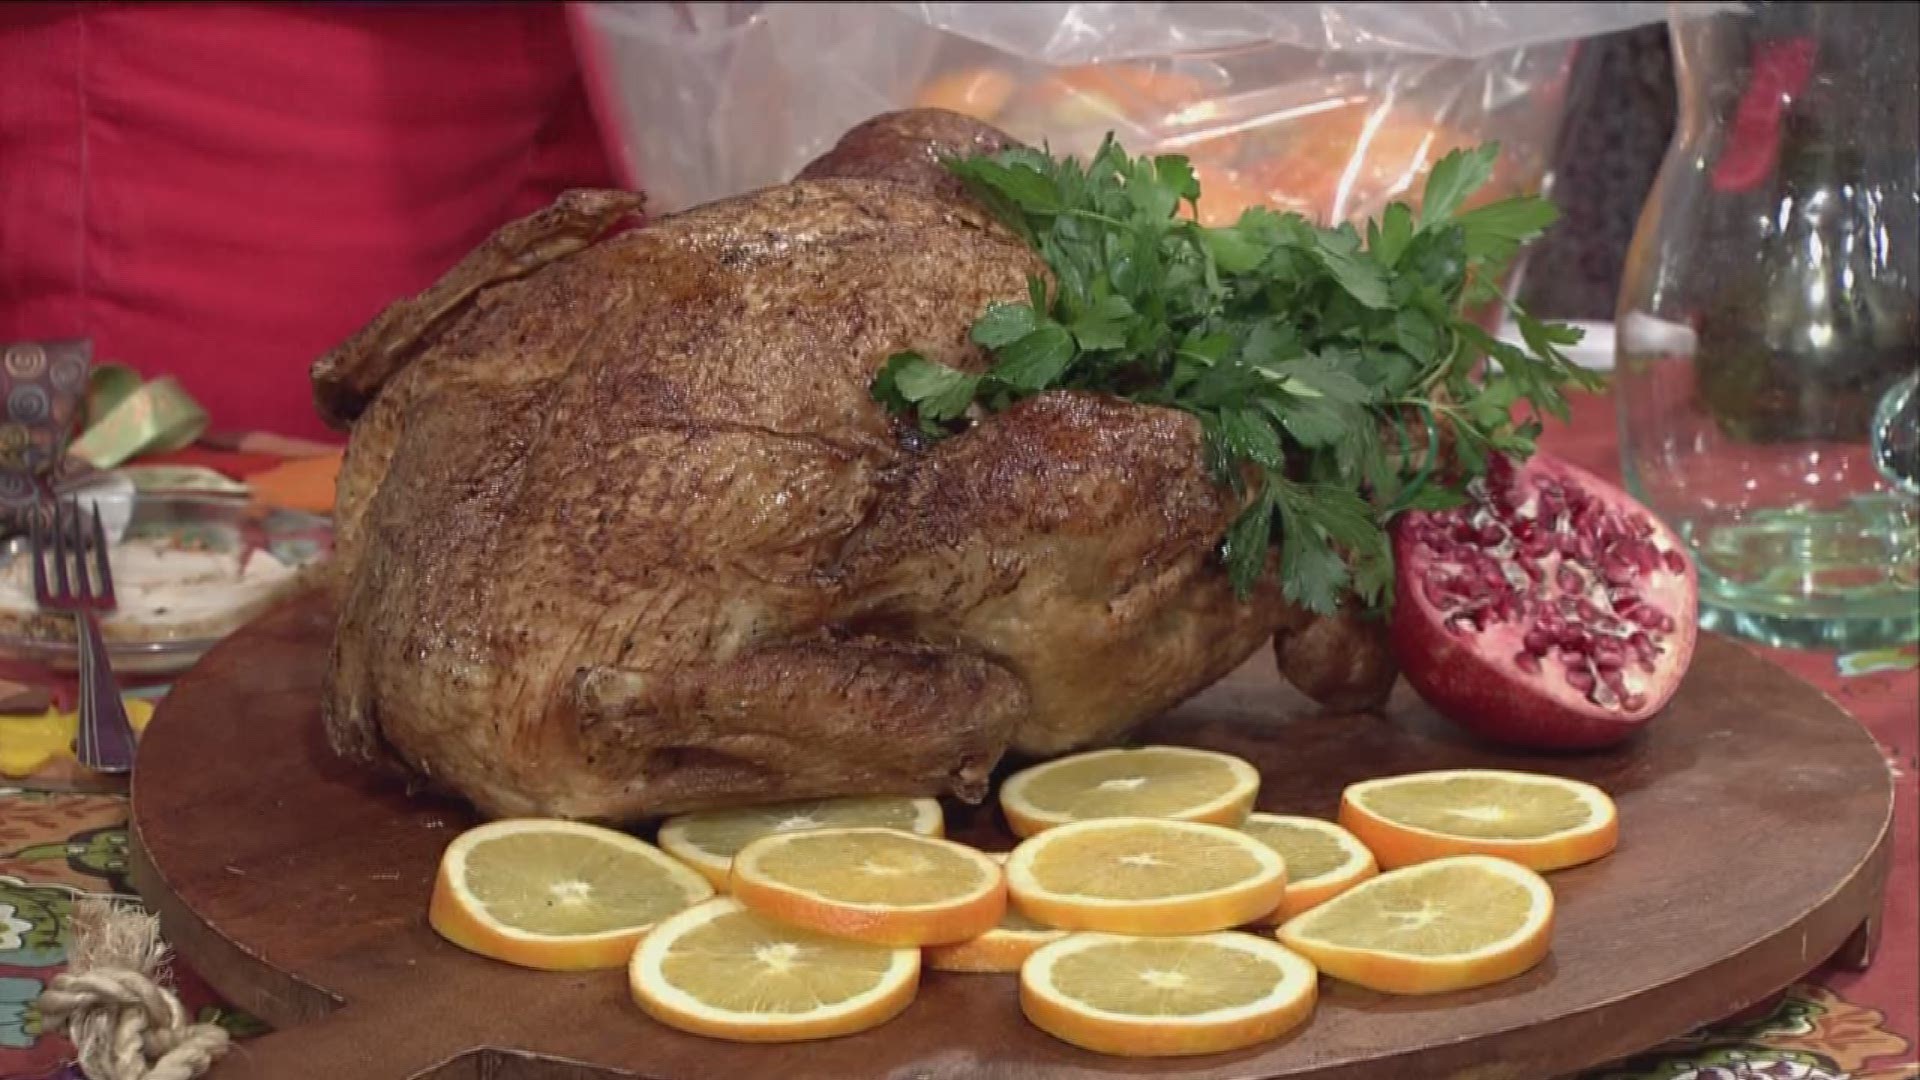 Taste and Savor's Chef Nancy Waldeck shares top tips for frying your turkey this Thanksgiving in a healthy way!